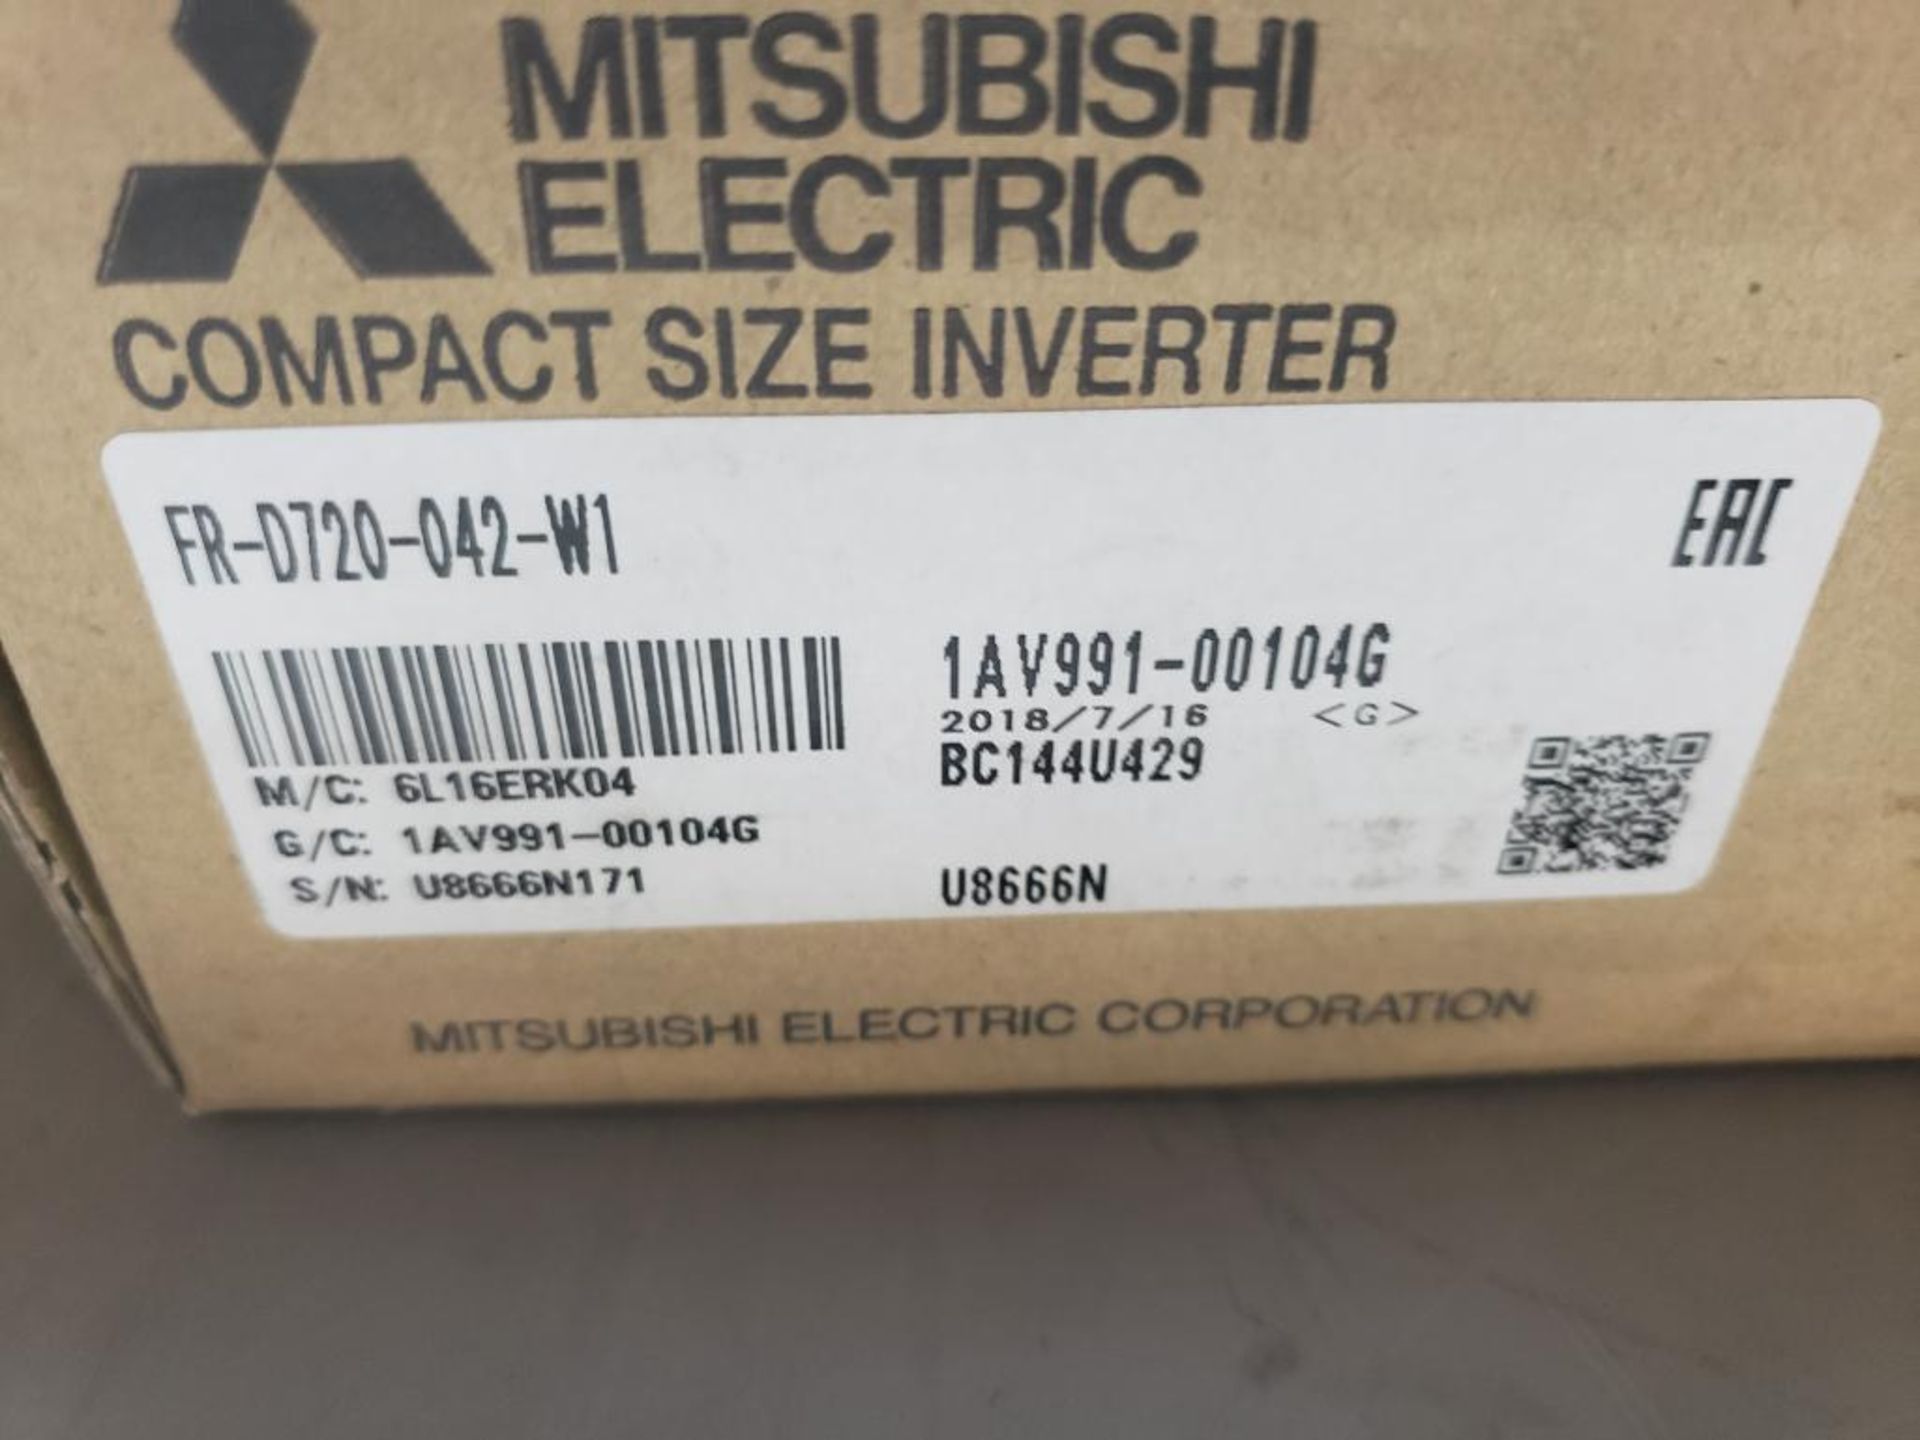 Mitsubishi inverter drive. Part number FR-D720-042-W1. New in box. - Image 2 of 4